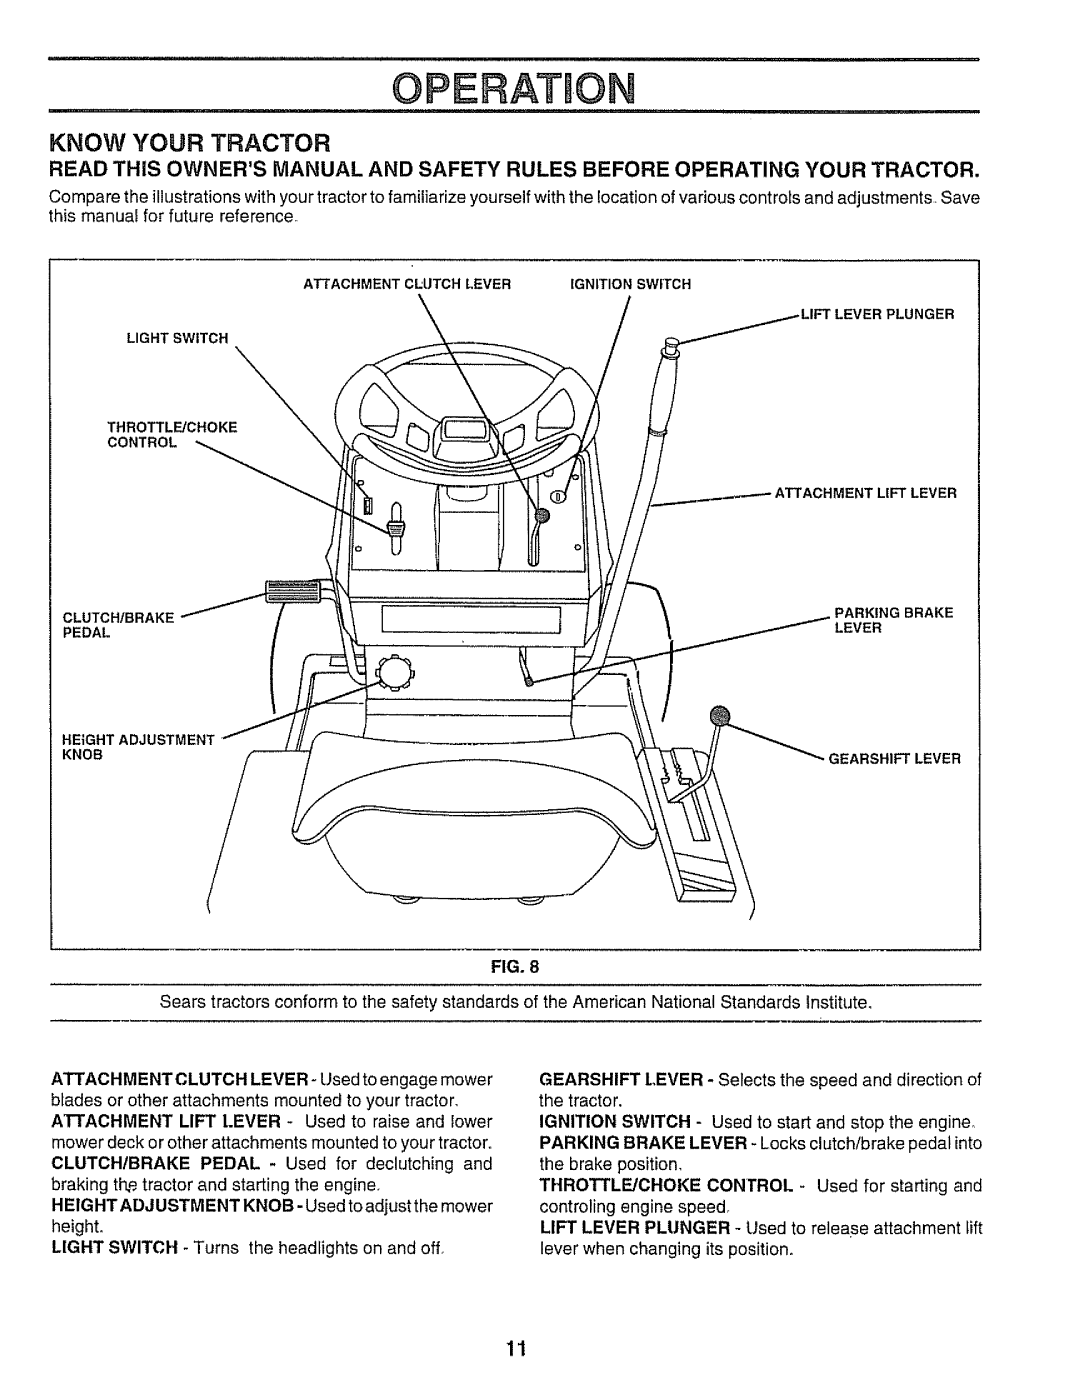 Sears 917.25545 owner manual Operation, Know Your Tractor 